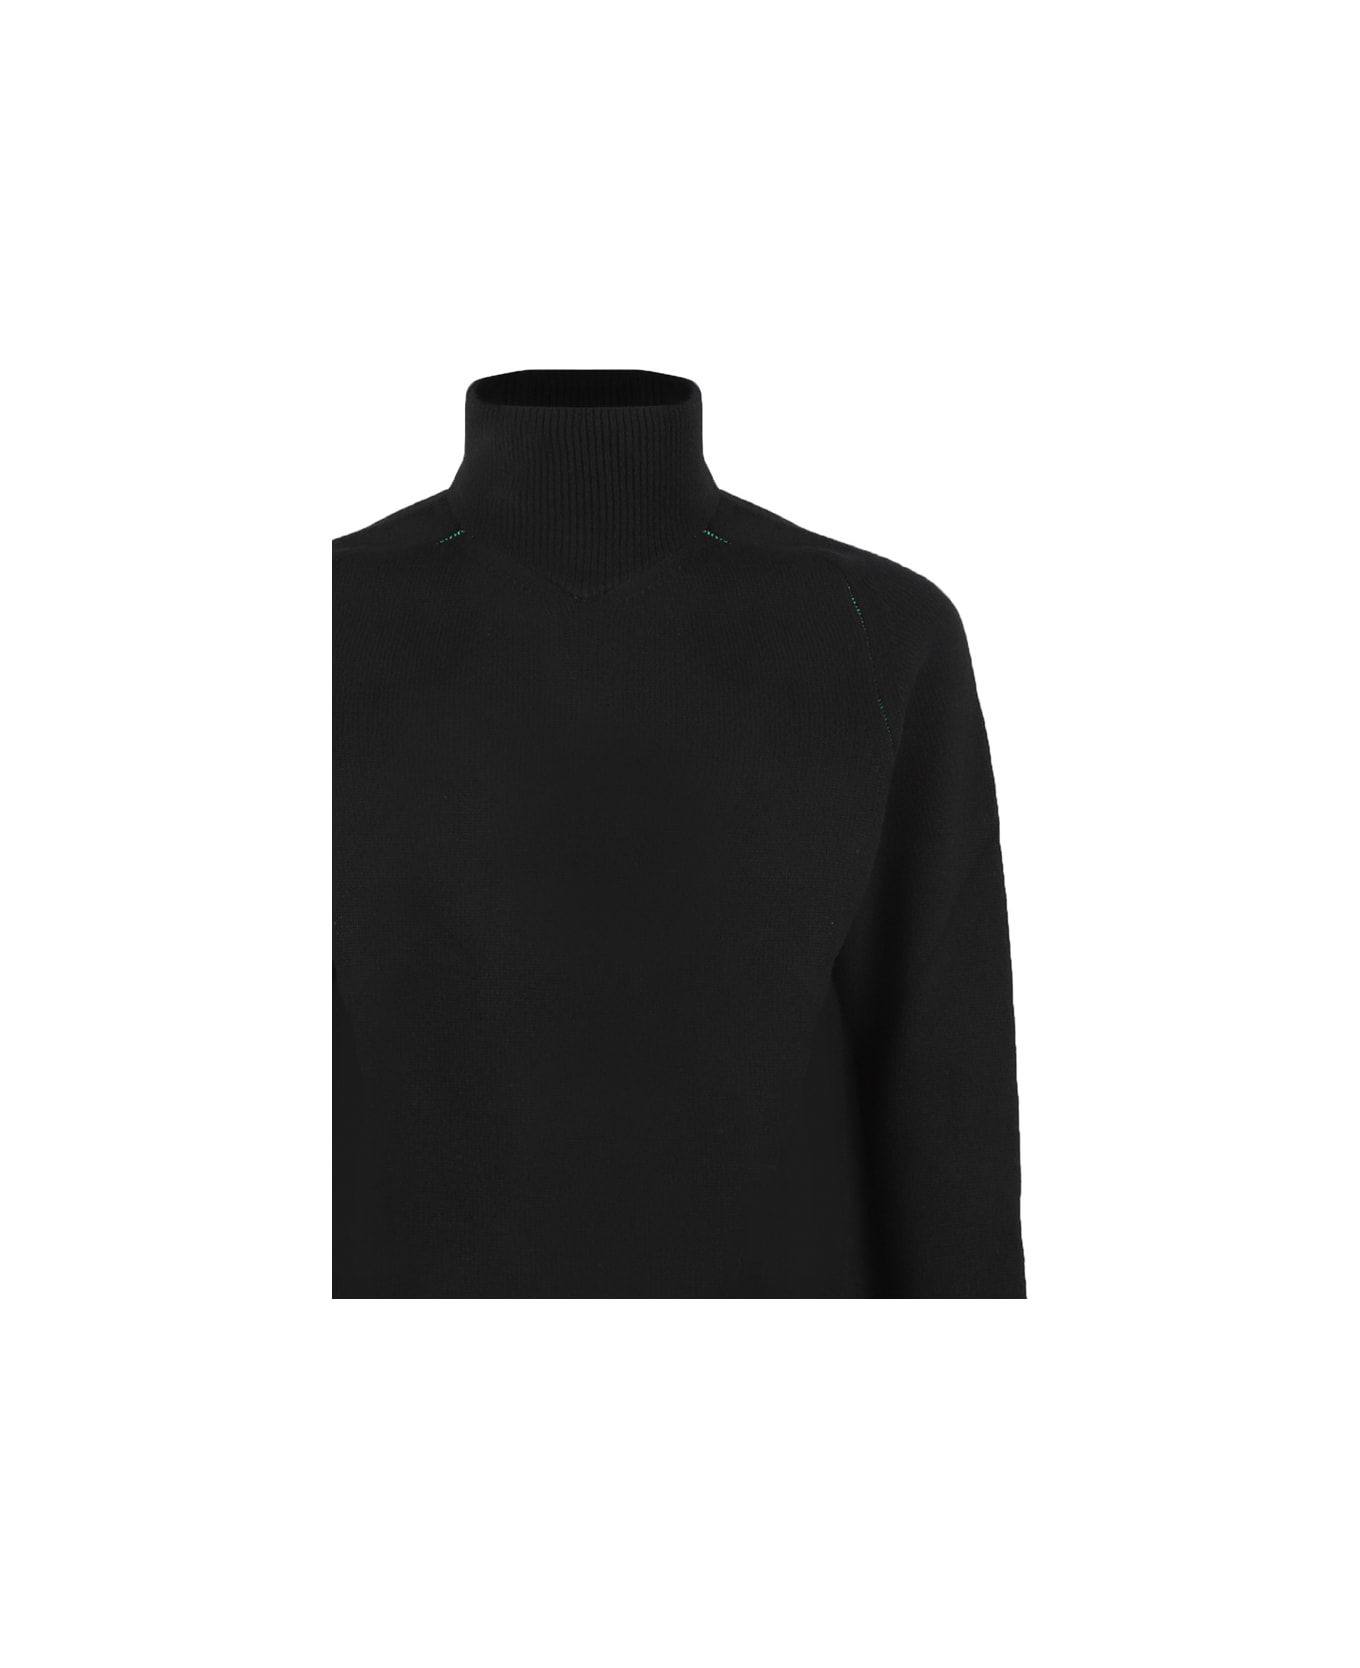 Bottega Veneta Knitted Wool Pullover With Contrasting Stitching - Black